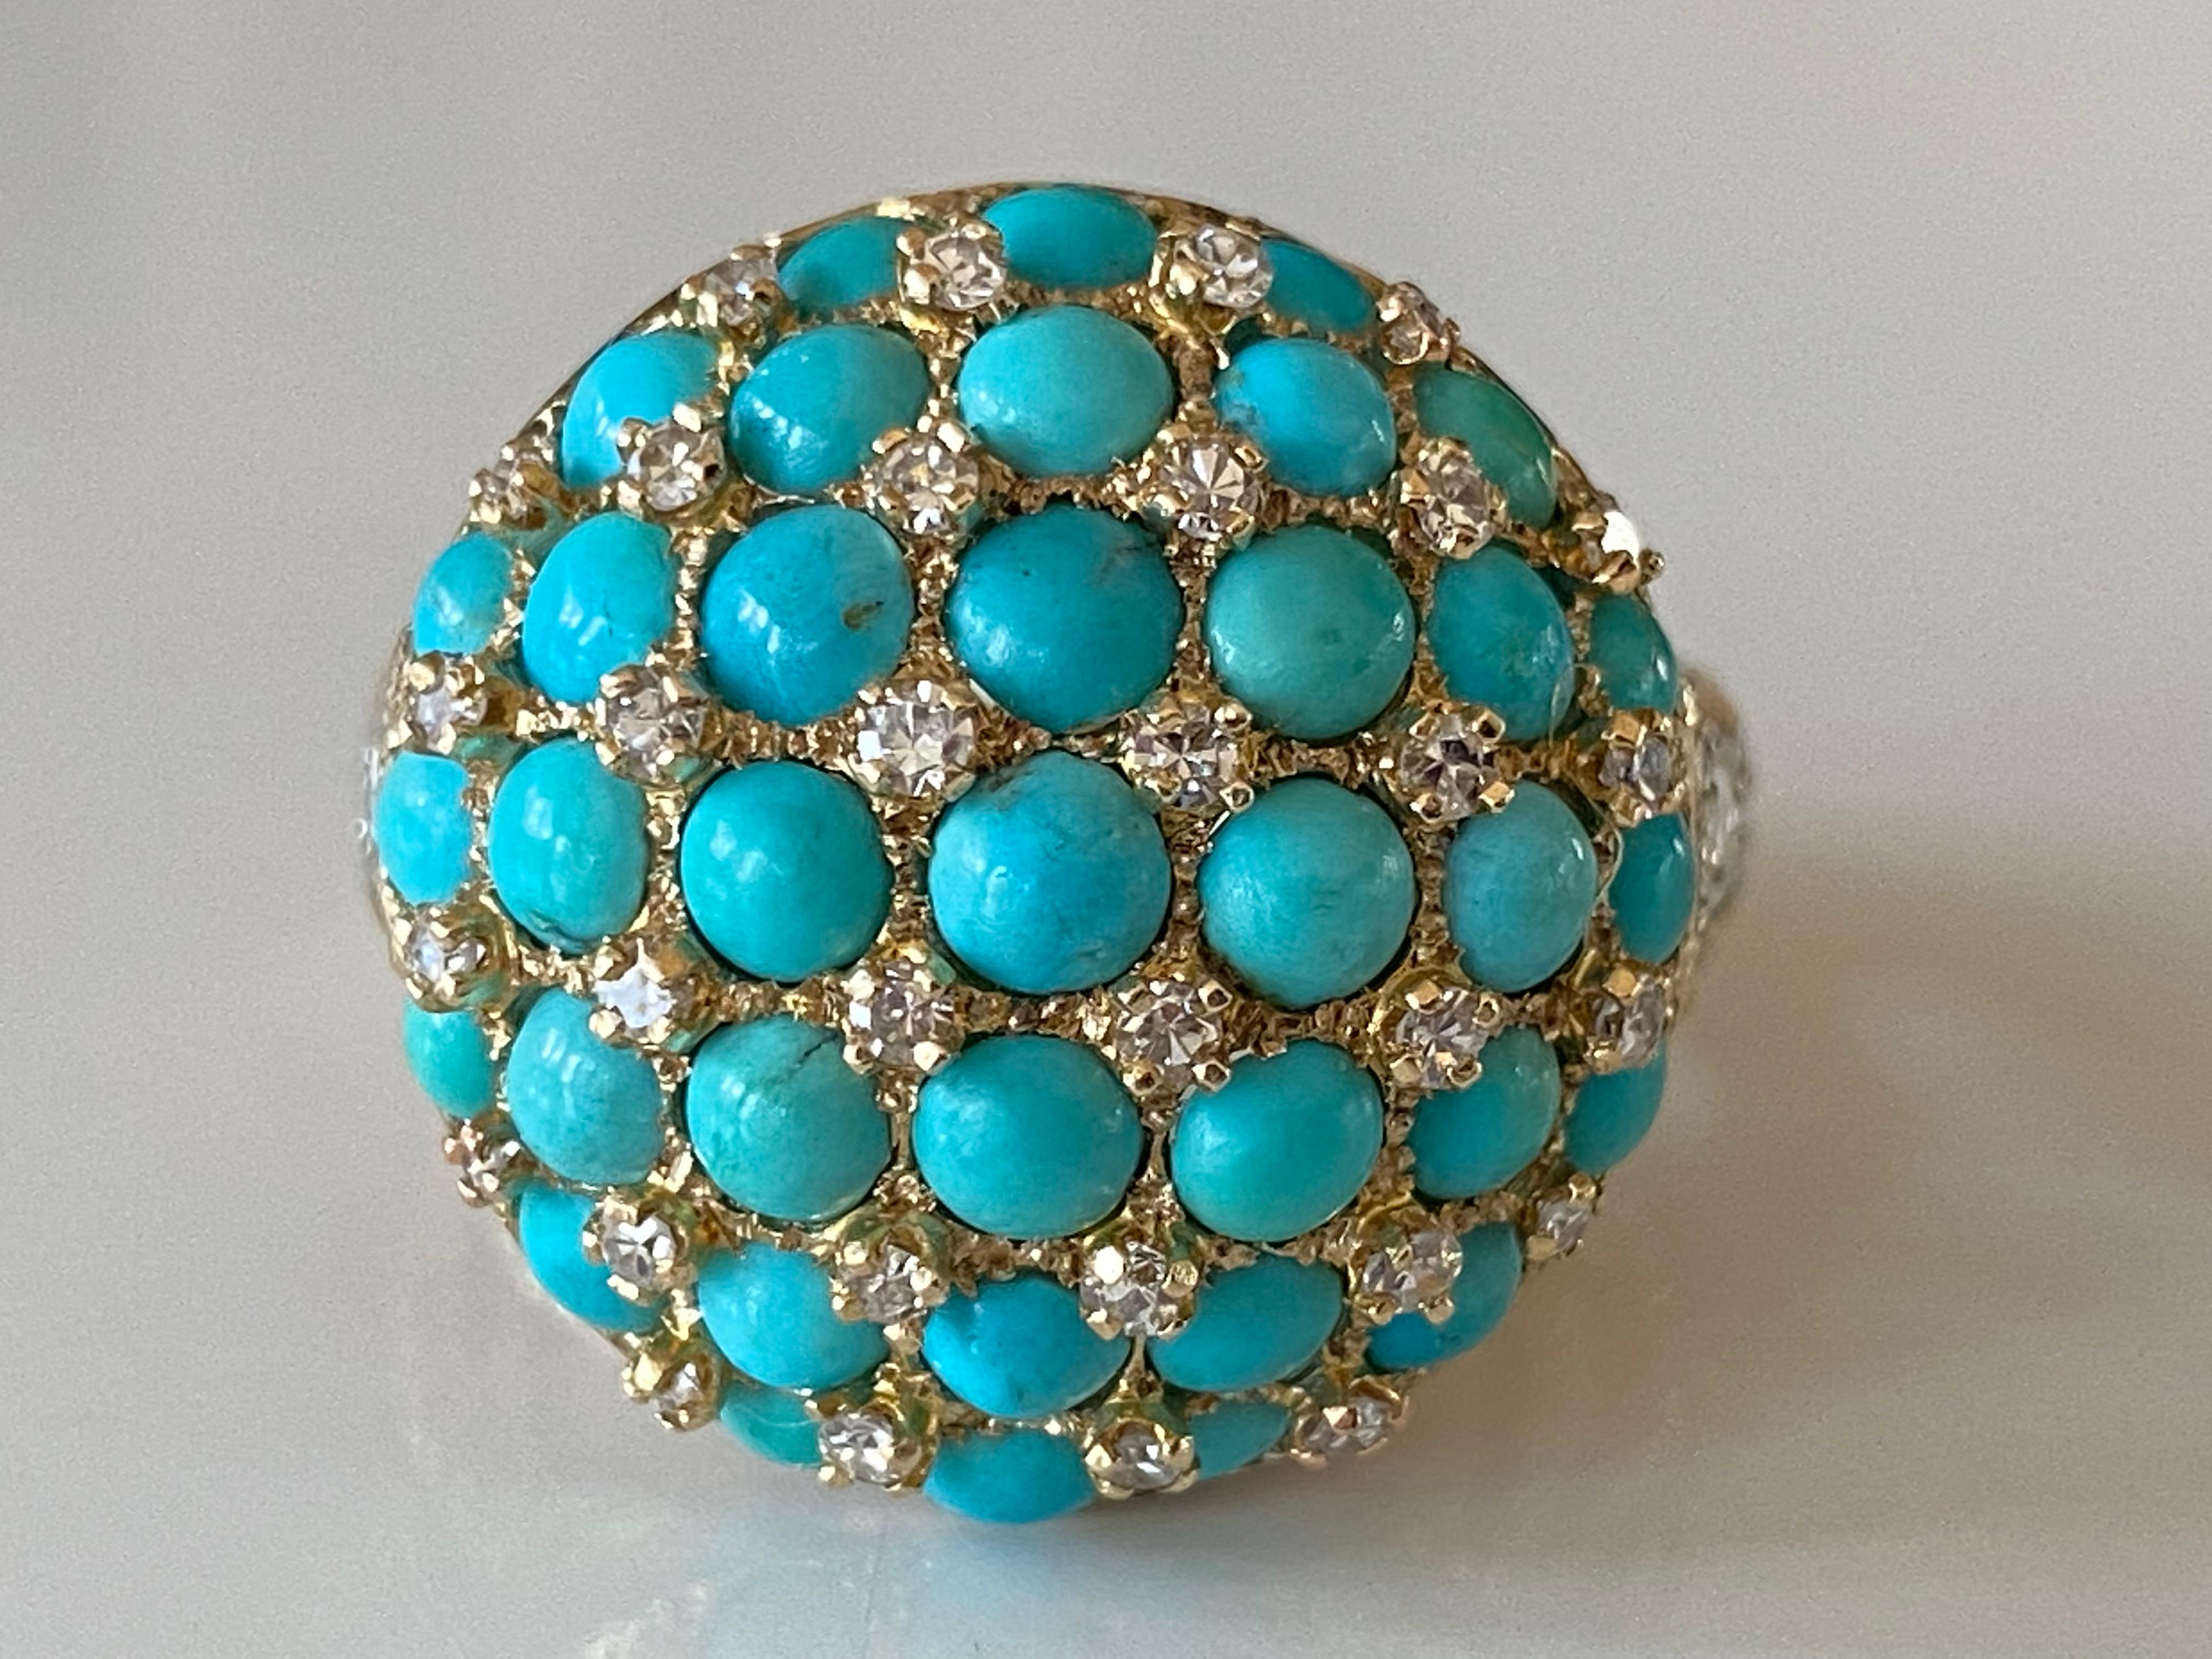 This magnificent Mid-century cocktail ring features thirty-seven round cabochon natural turquoise interspersed with thirty-two single cut diamonds arrayed over a dome shape with two marquise diamonds and six additional single cut diamonds tapered on